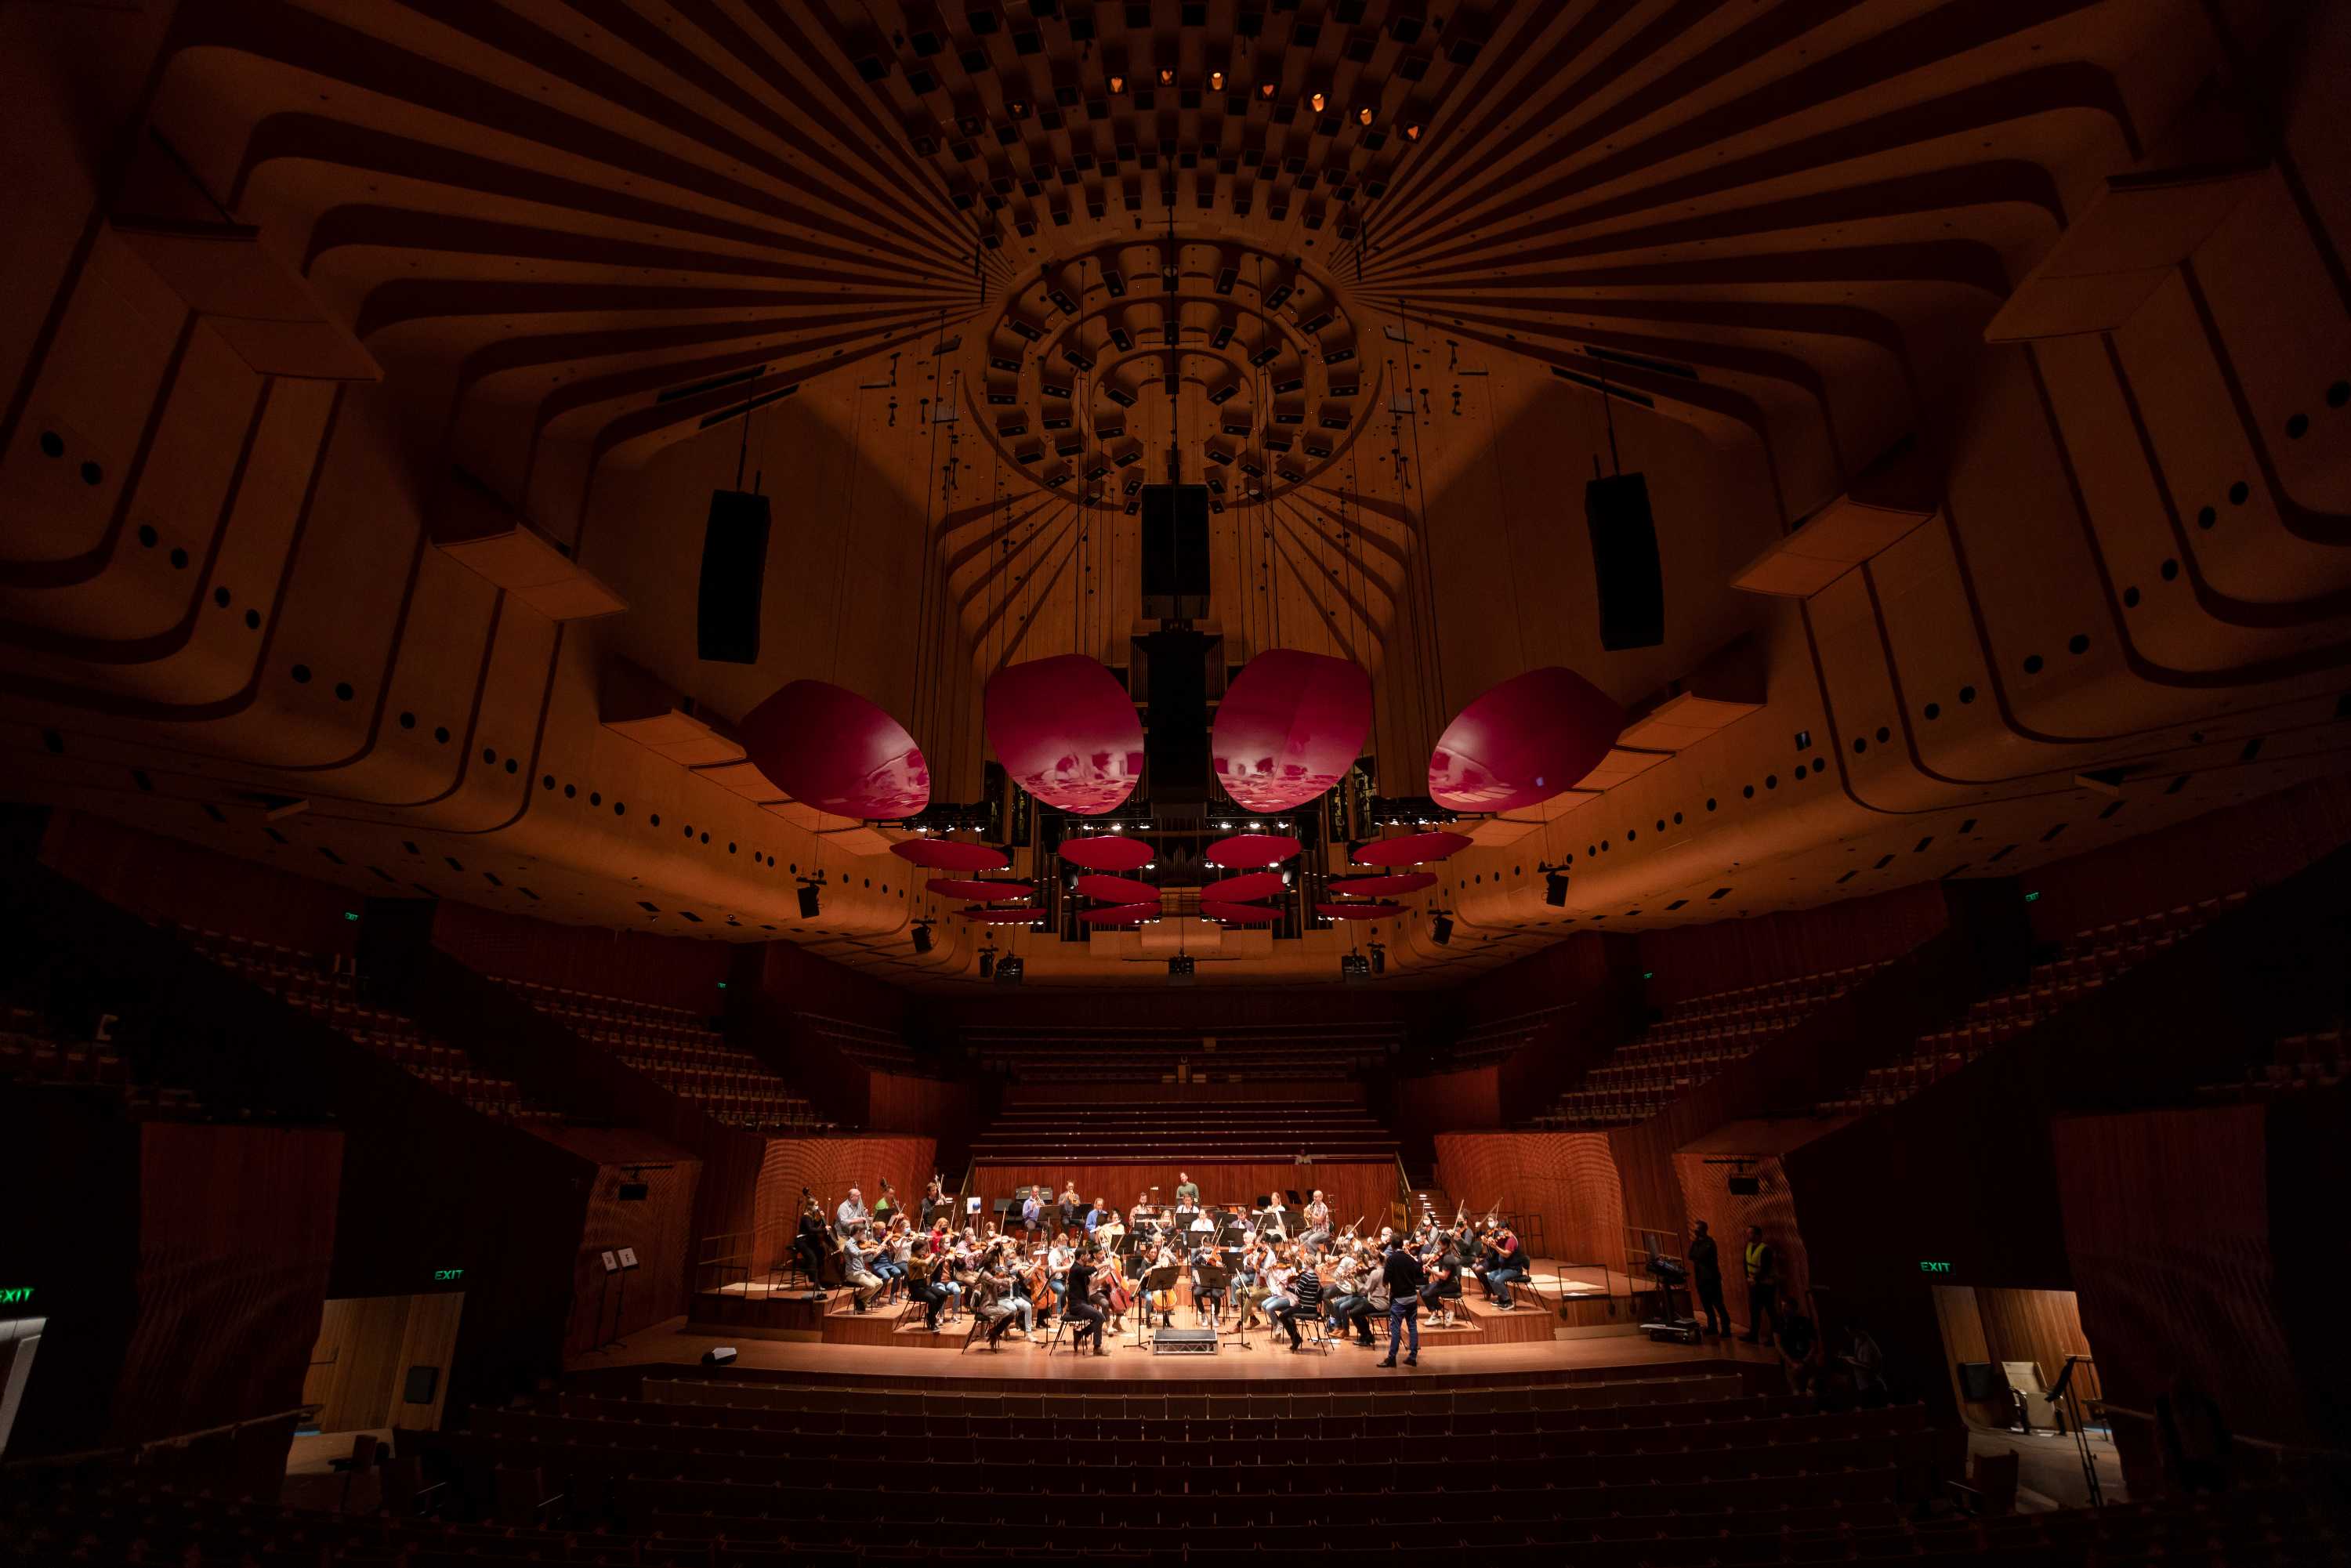 Behind the scenes at Sydney Opera House's renovated Concert Hall